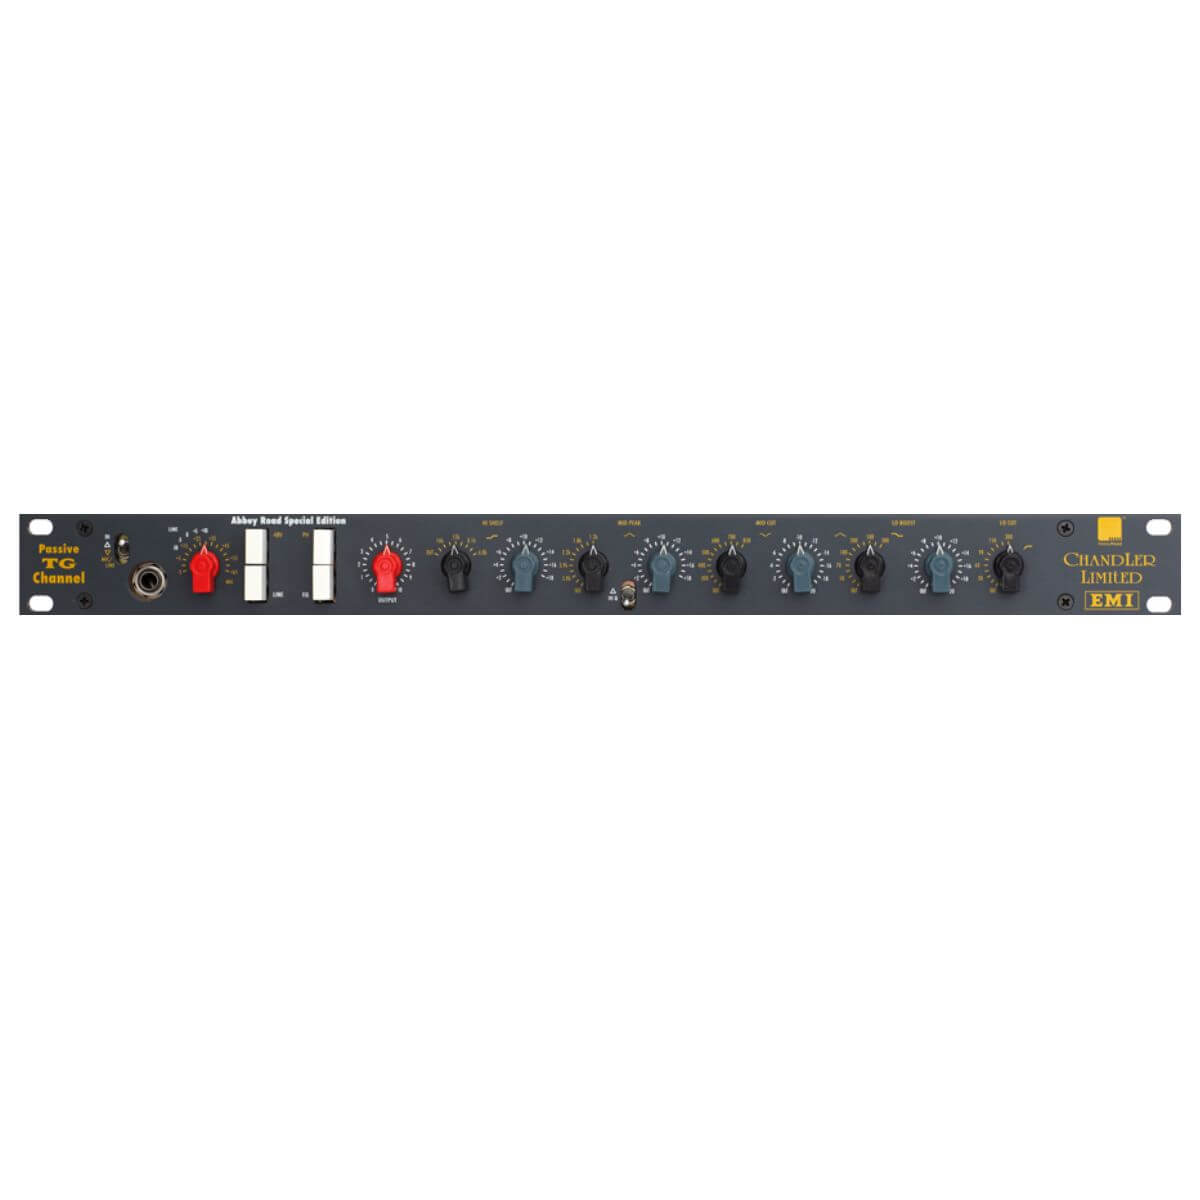 EMI Abbey Road Series, Rackmount And Mics TG12411 Fomerly TG CHANNEL MKII